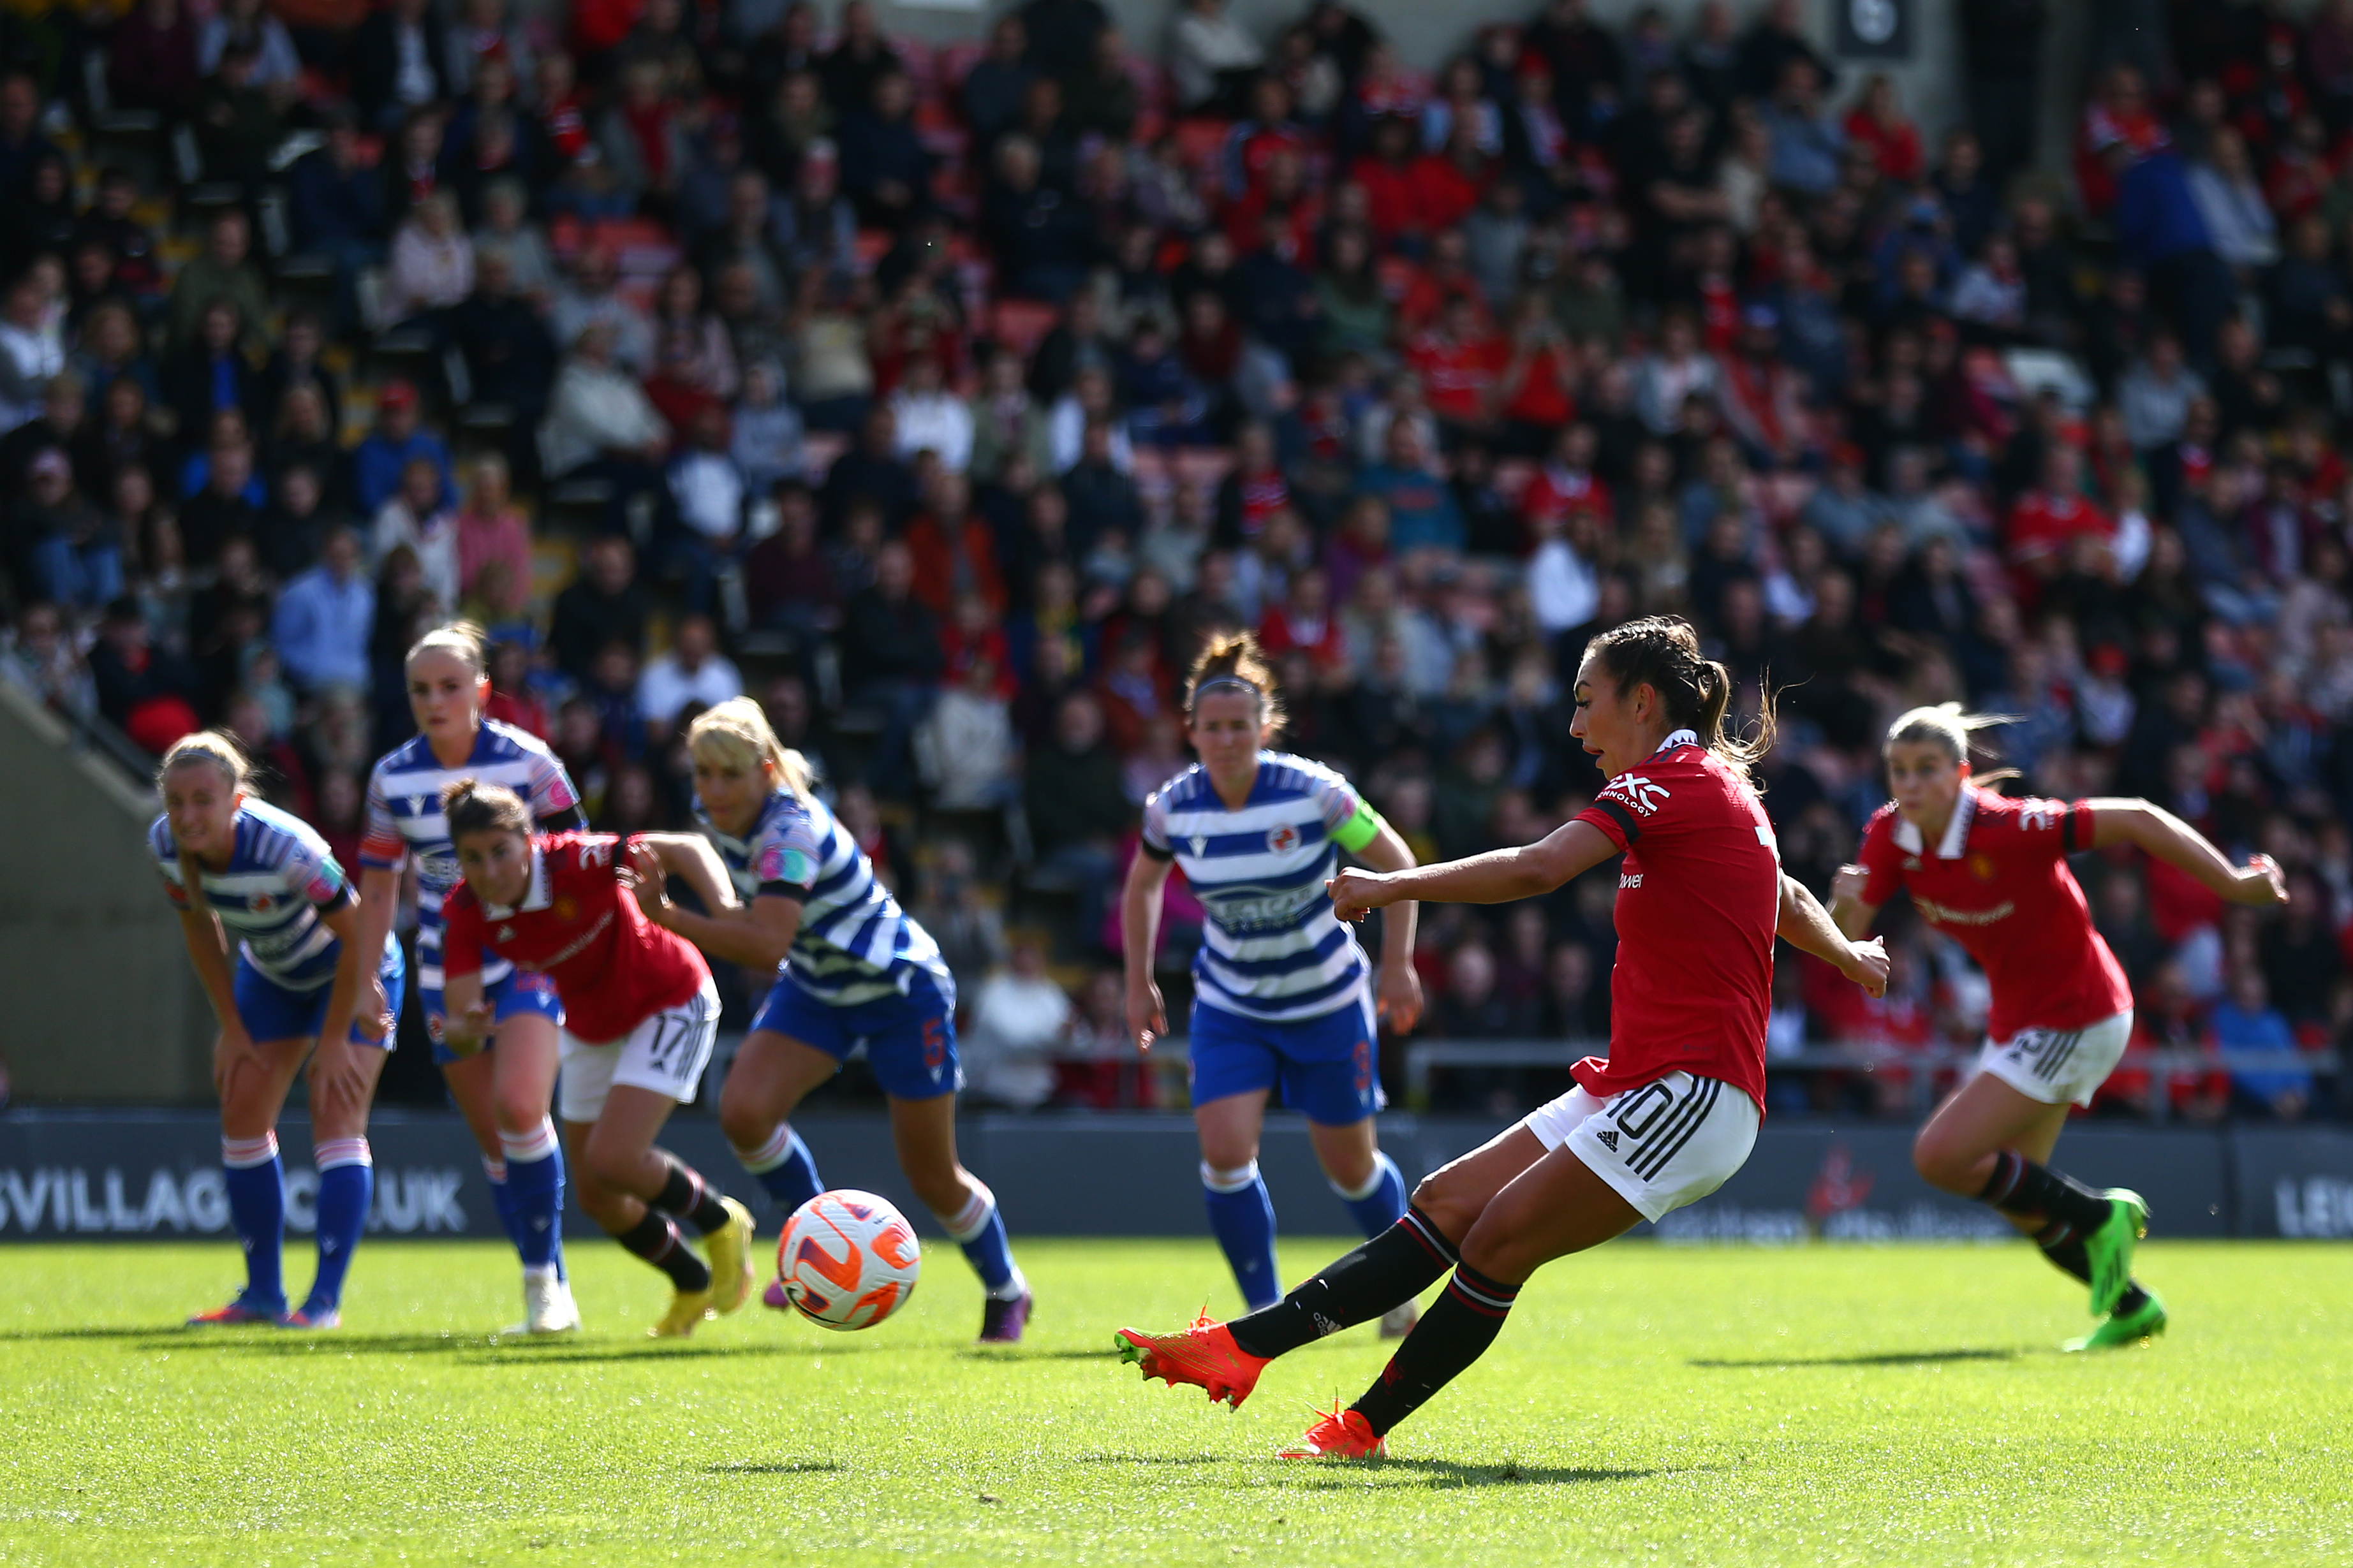 Manchester United v Reading - Women’s Super League - Leigh Sports Village